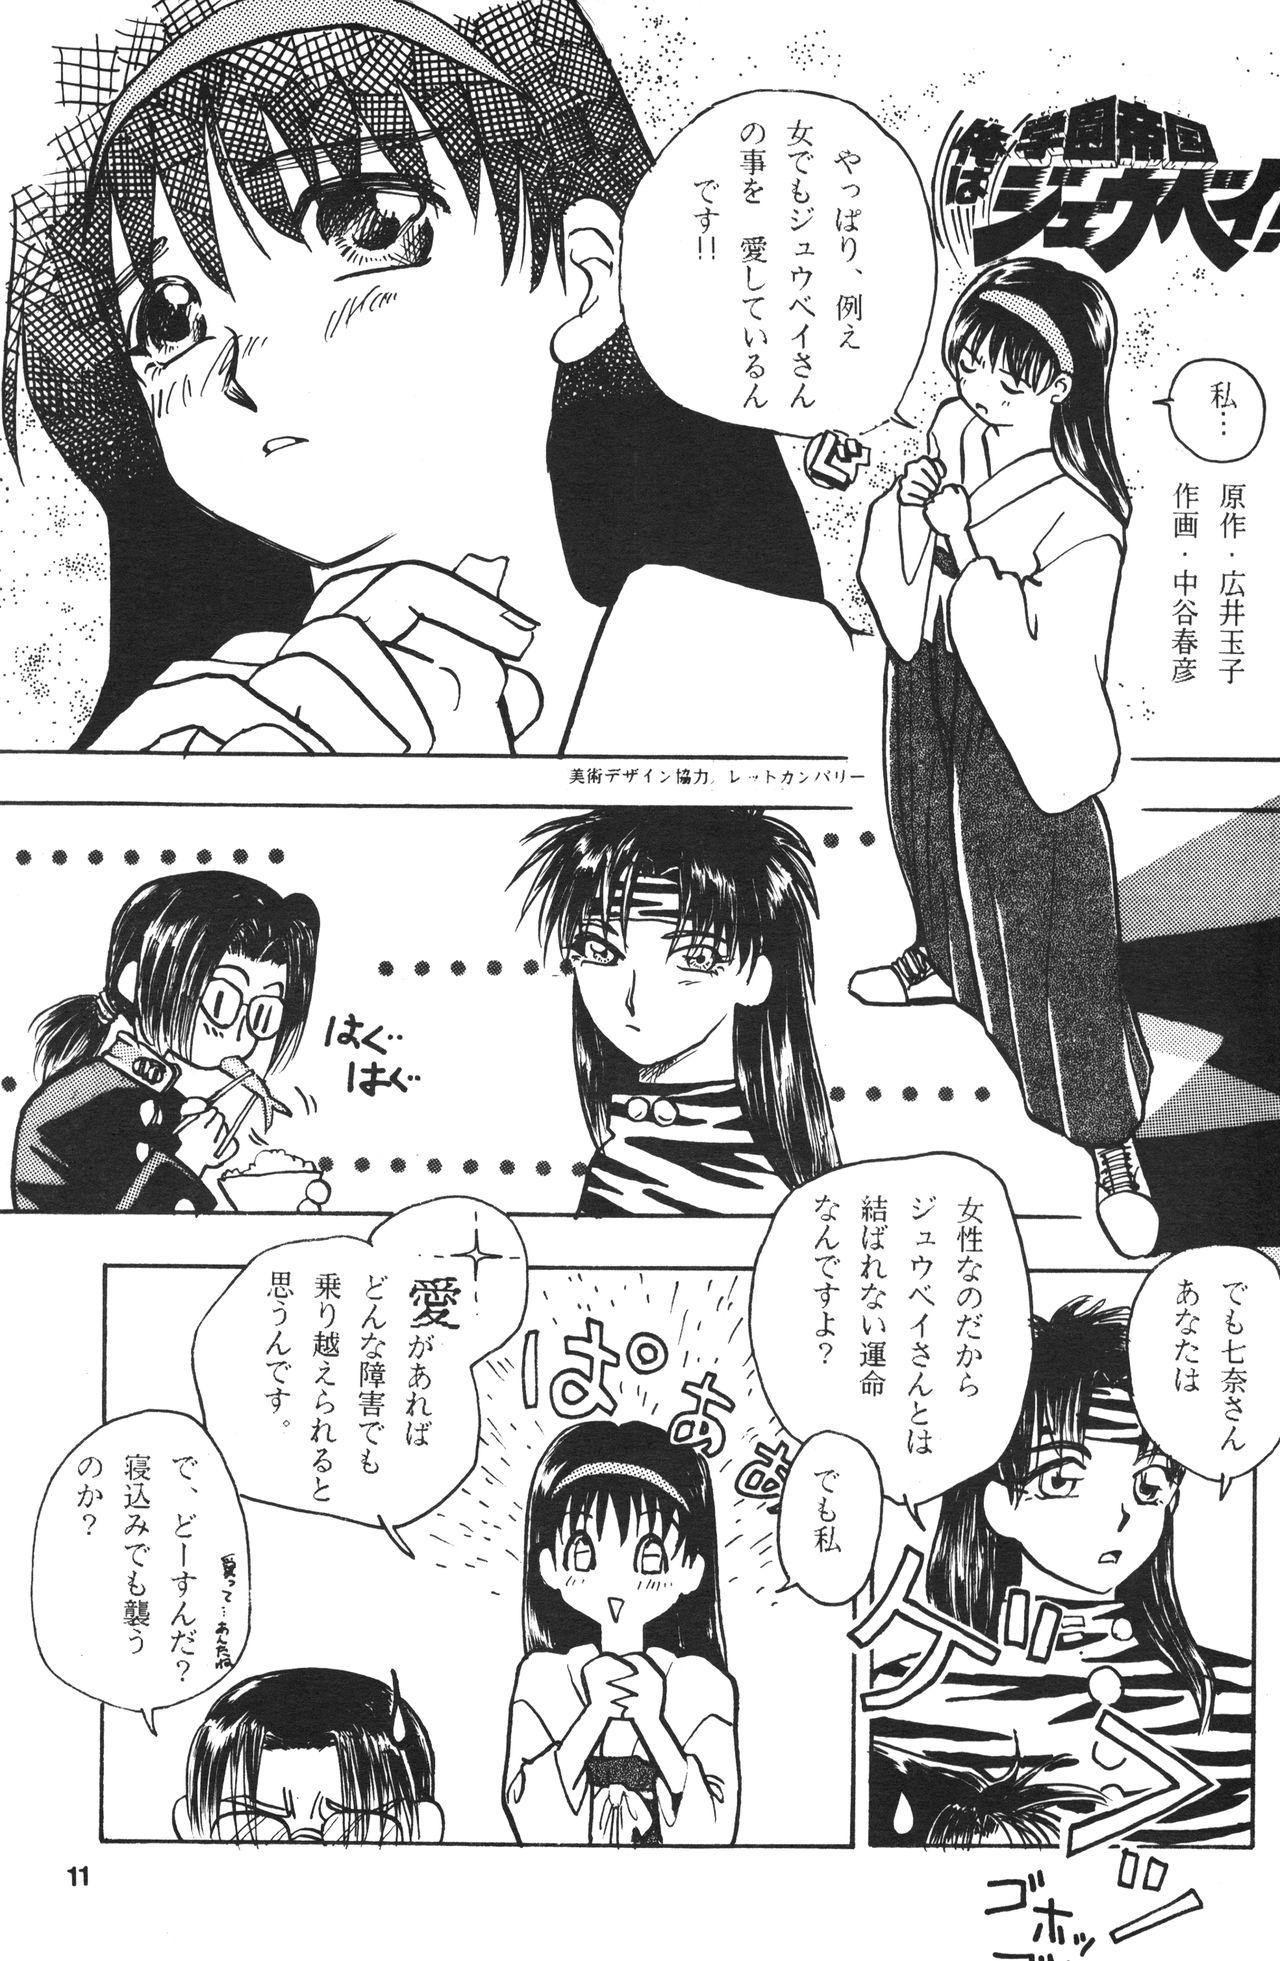 Harcore Seinen Sunday - Street fighter Ranma 12 Ghost sweeper mikami Chudai - Page 10